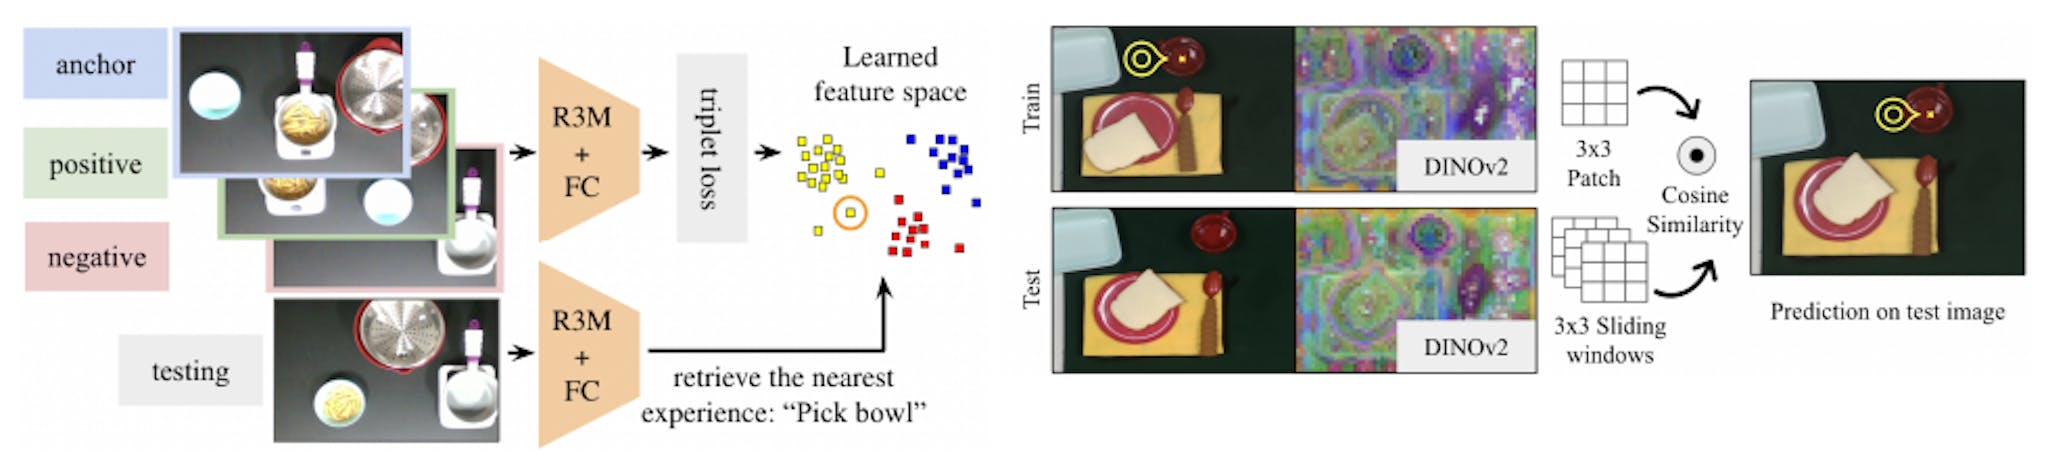 Figure 4: Left: Retrieval-based few-shot object and skill selection model. The model learns a latent representation for observations. Given a new observation, it finds the most relevant experience in the memory and selects the corresponding skill and object. Right: One-shot skill parameter learning algorithm, which finds a semantically corresponding point in the test image given a reference point in the training image. The feature visualization shows 3 of the 768 DINOv2 tokens used.